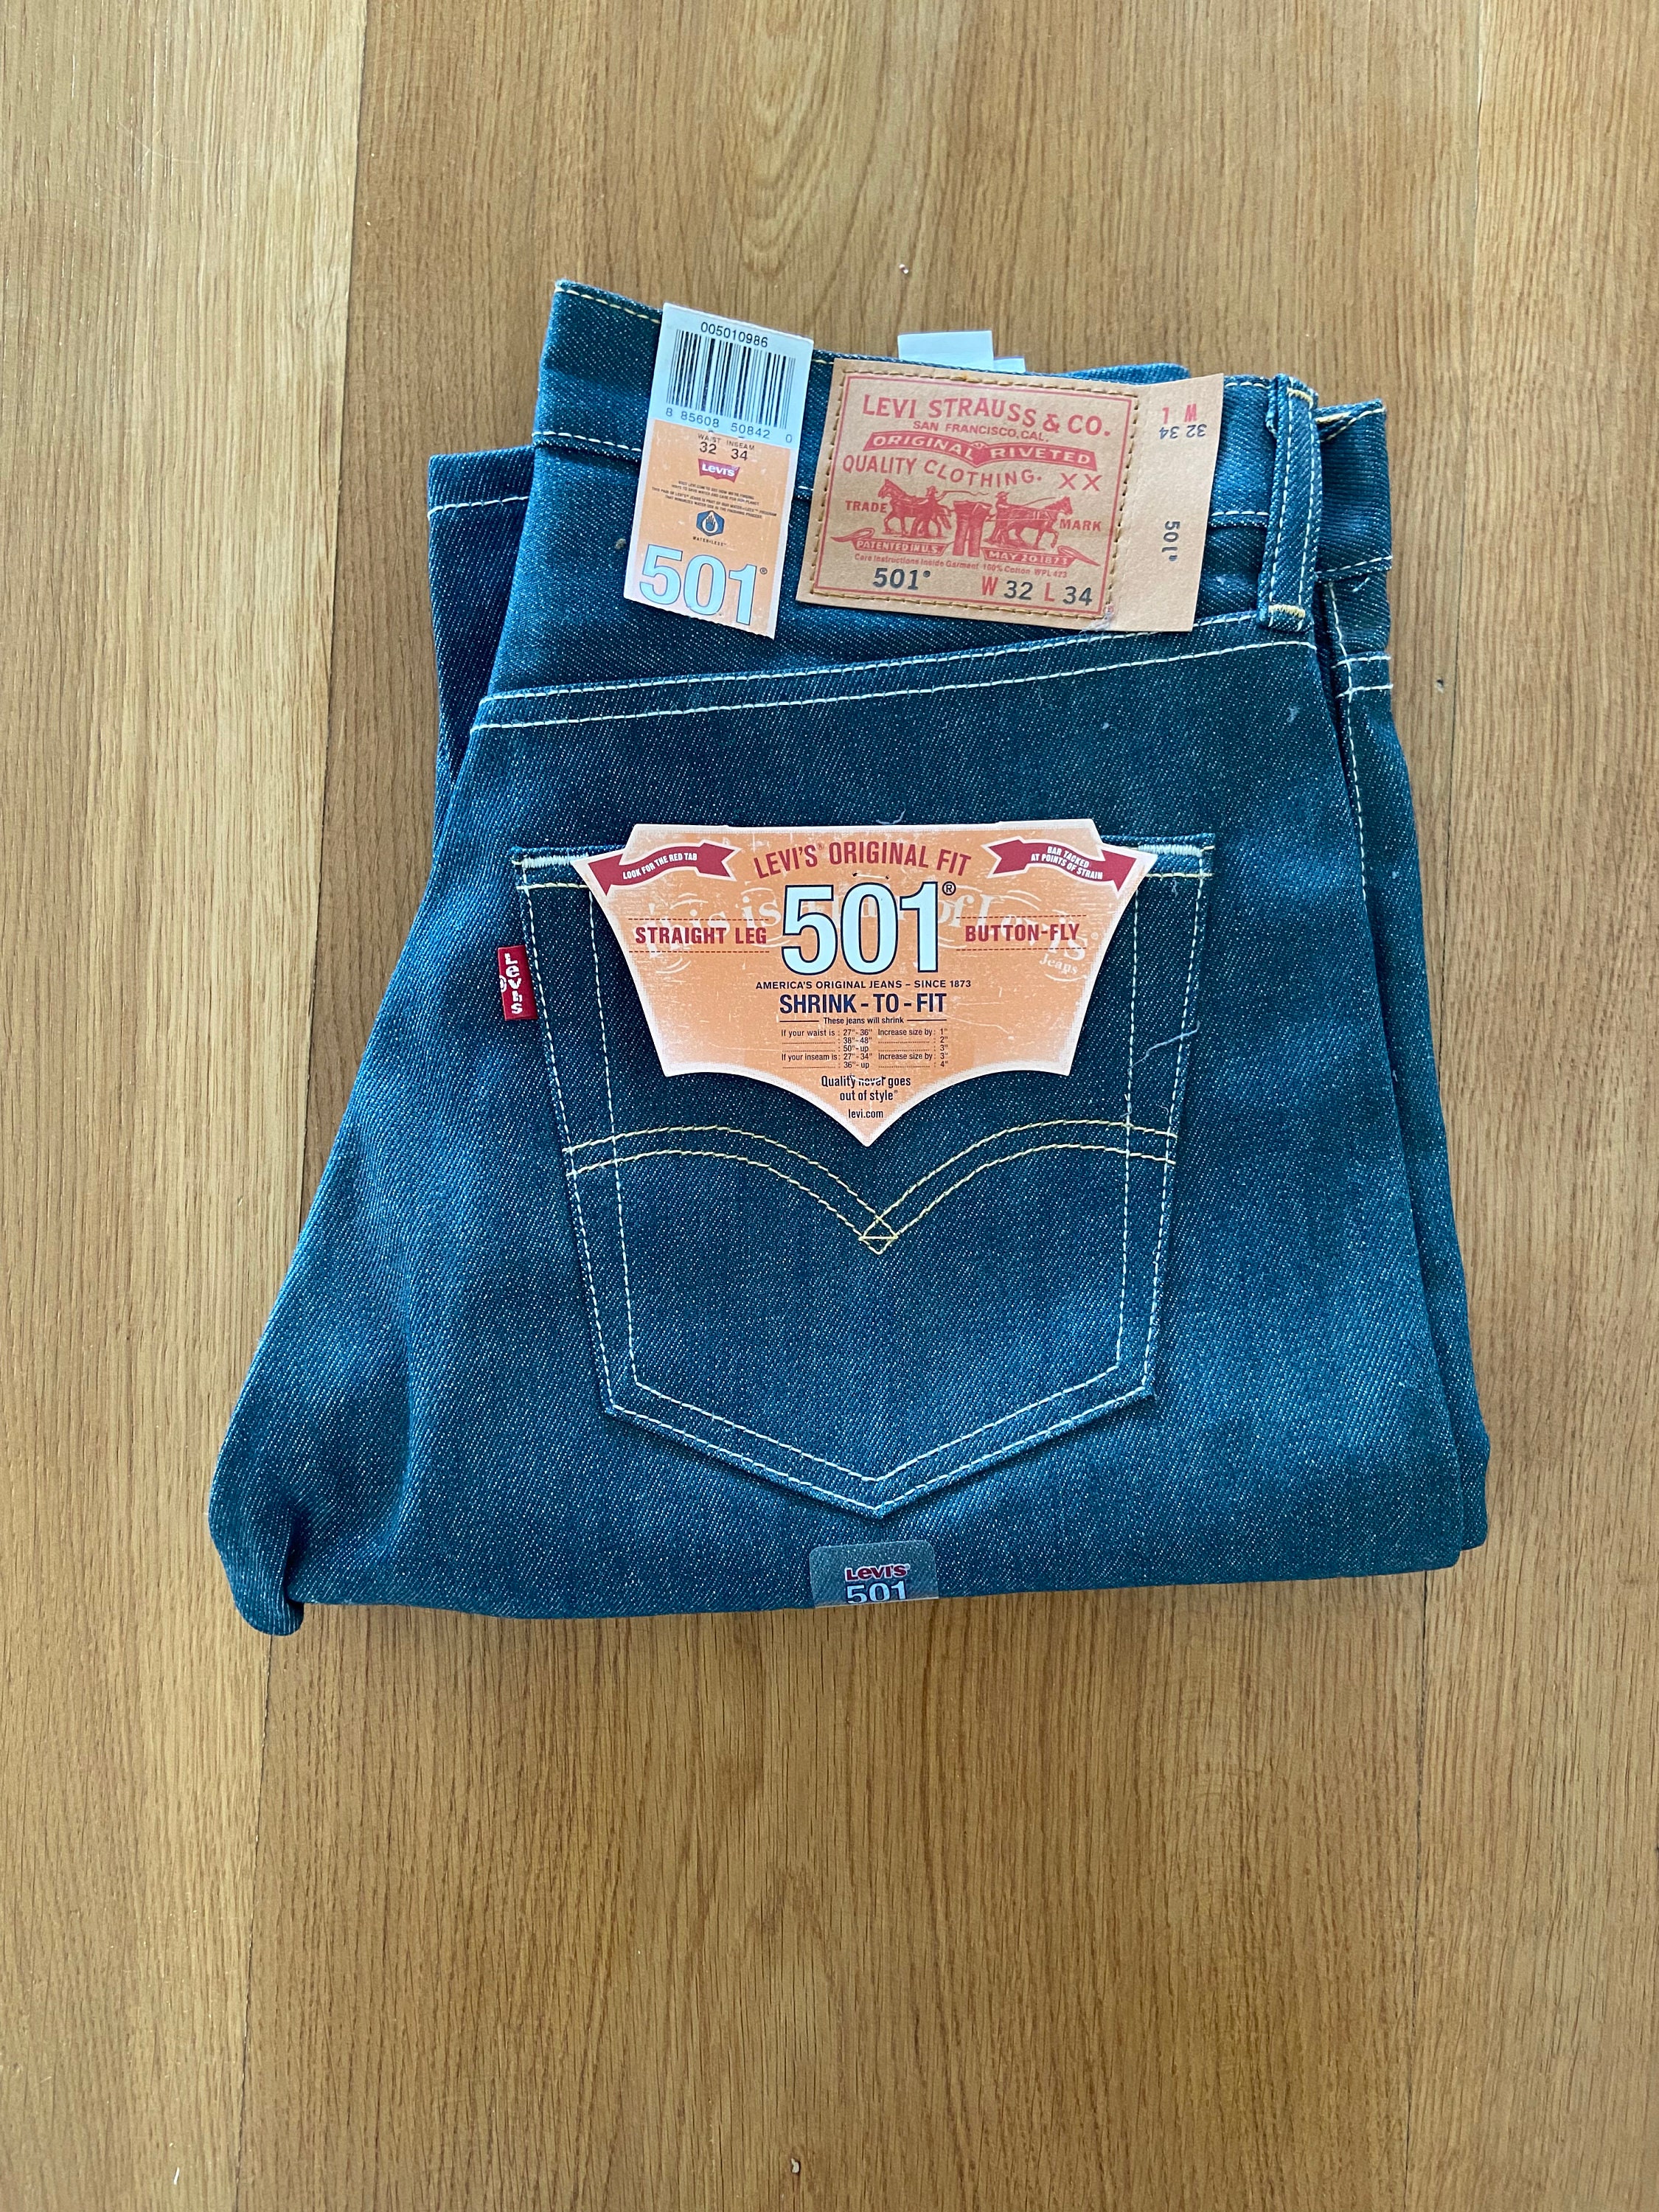 NOS Deadstock Levis 501 Shrink to Fit 32/34 - Etsy